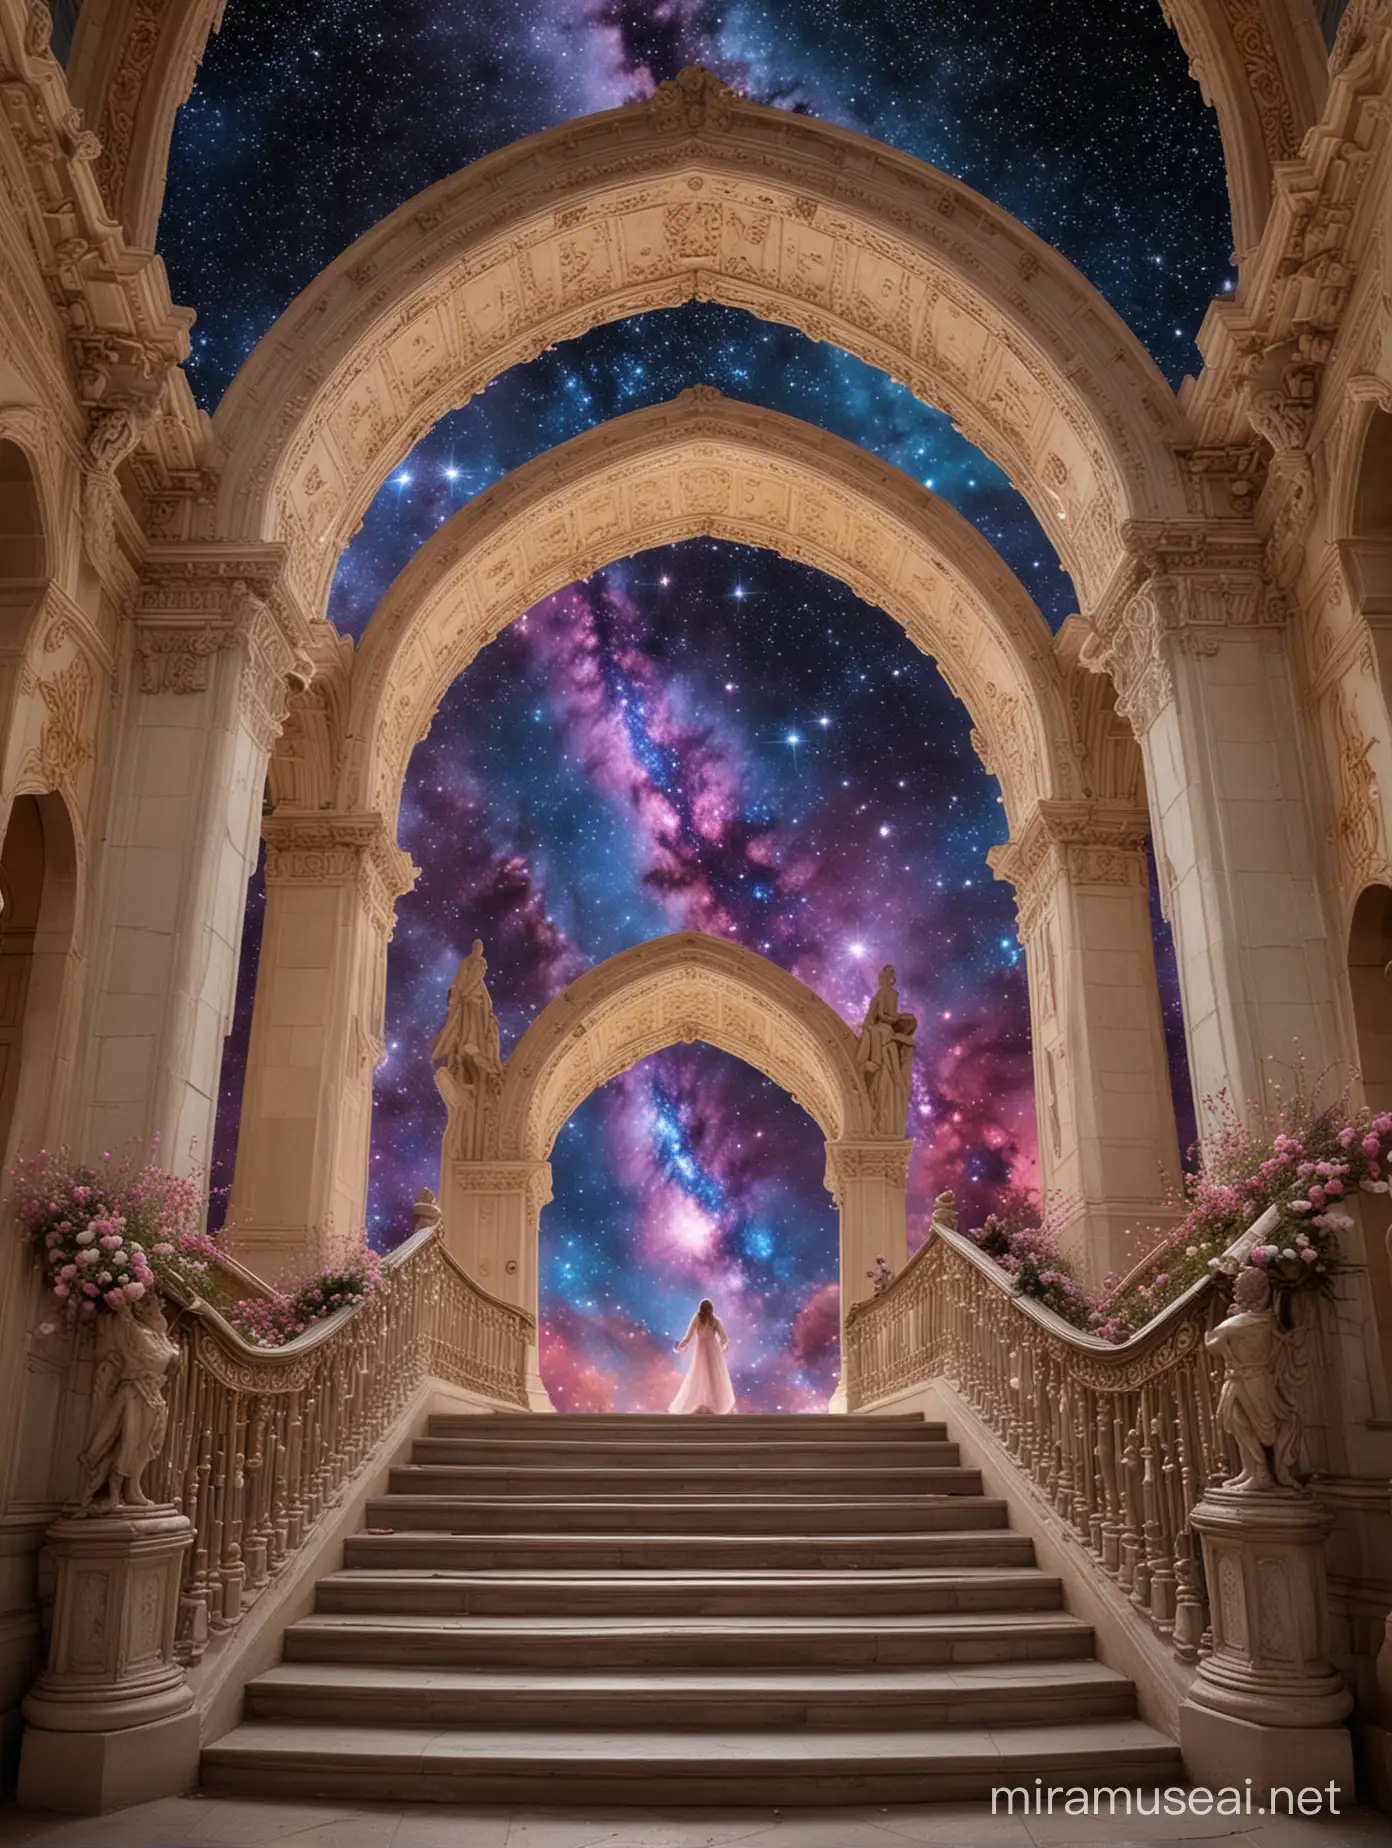  This image depicts a fantastical and celestial setting. The central focus is a grand staircase with golden trim, leading up to an ornate, arched doorway that seems to be the gateway to another dimension or celestial place.  The background is filled with a mesmerizing display of stars, galaxies, and nebulae in vibrant colors of blue, purple, and pink. Four angelic figures with wings are positioned around the staircase; they are white and appear ethereal.  There are floating diamonds of different sizes scattered throughout the scene adding a magical element. The image conveys a sense of ascension and transcendence through the upward leading stairs and the heavenly beings. It’s like a scene from a dream or a fantasy novel.